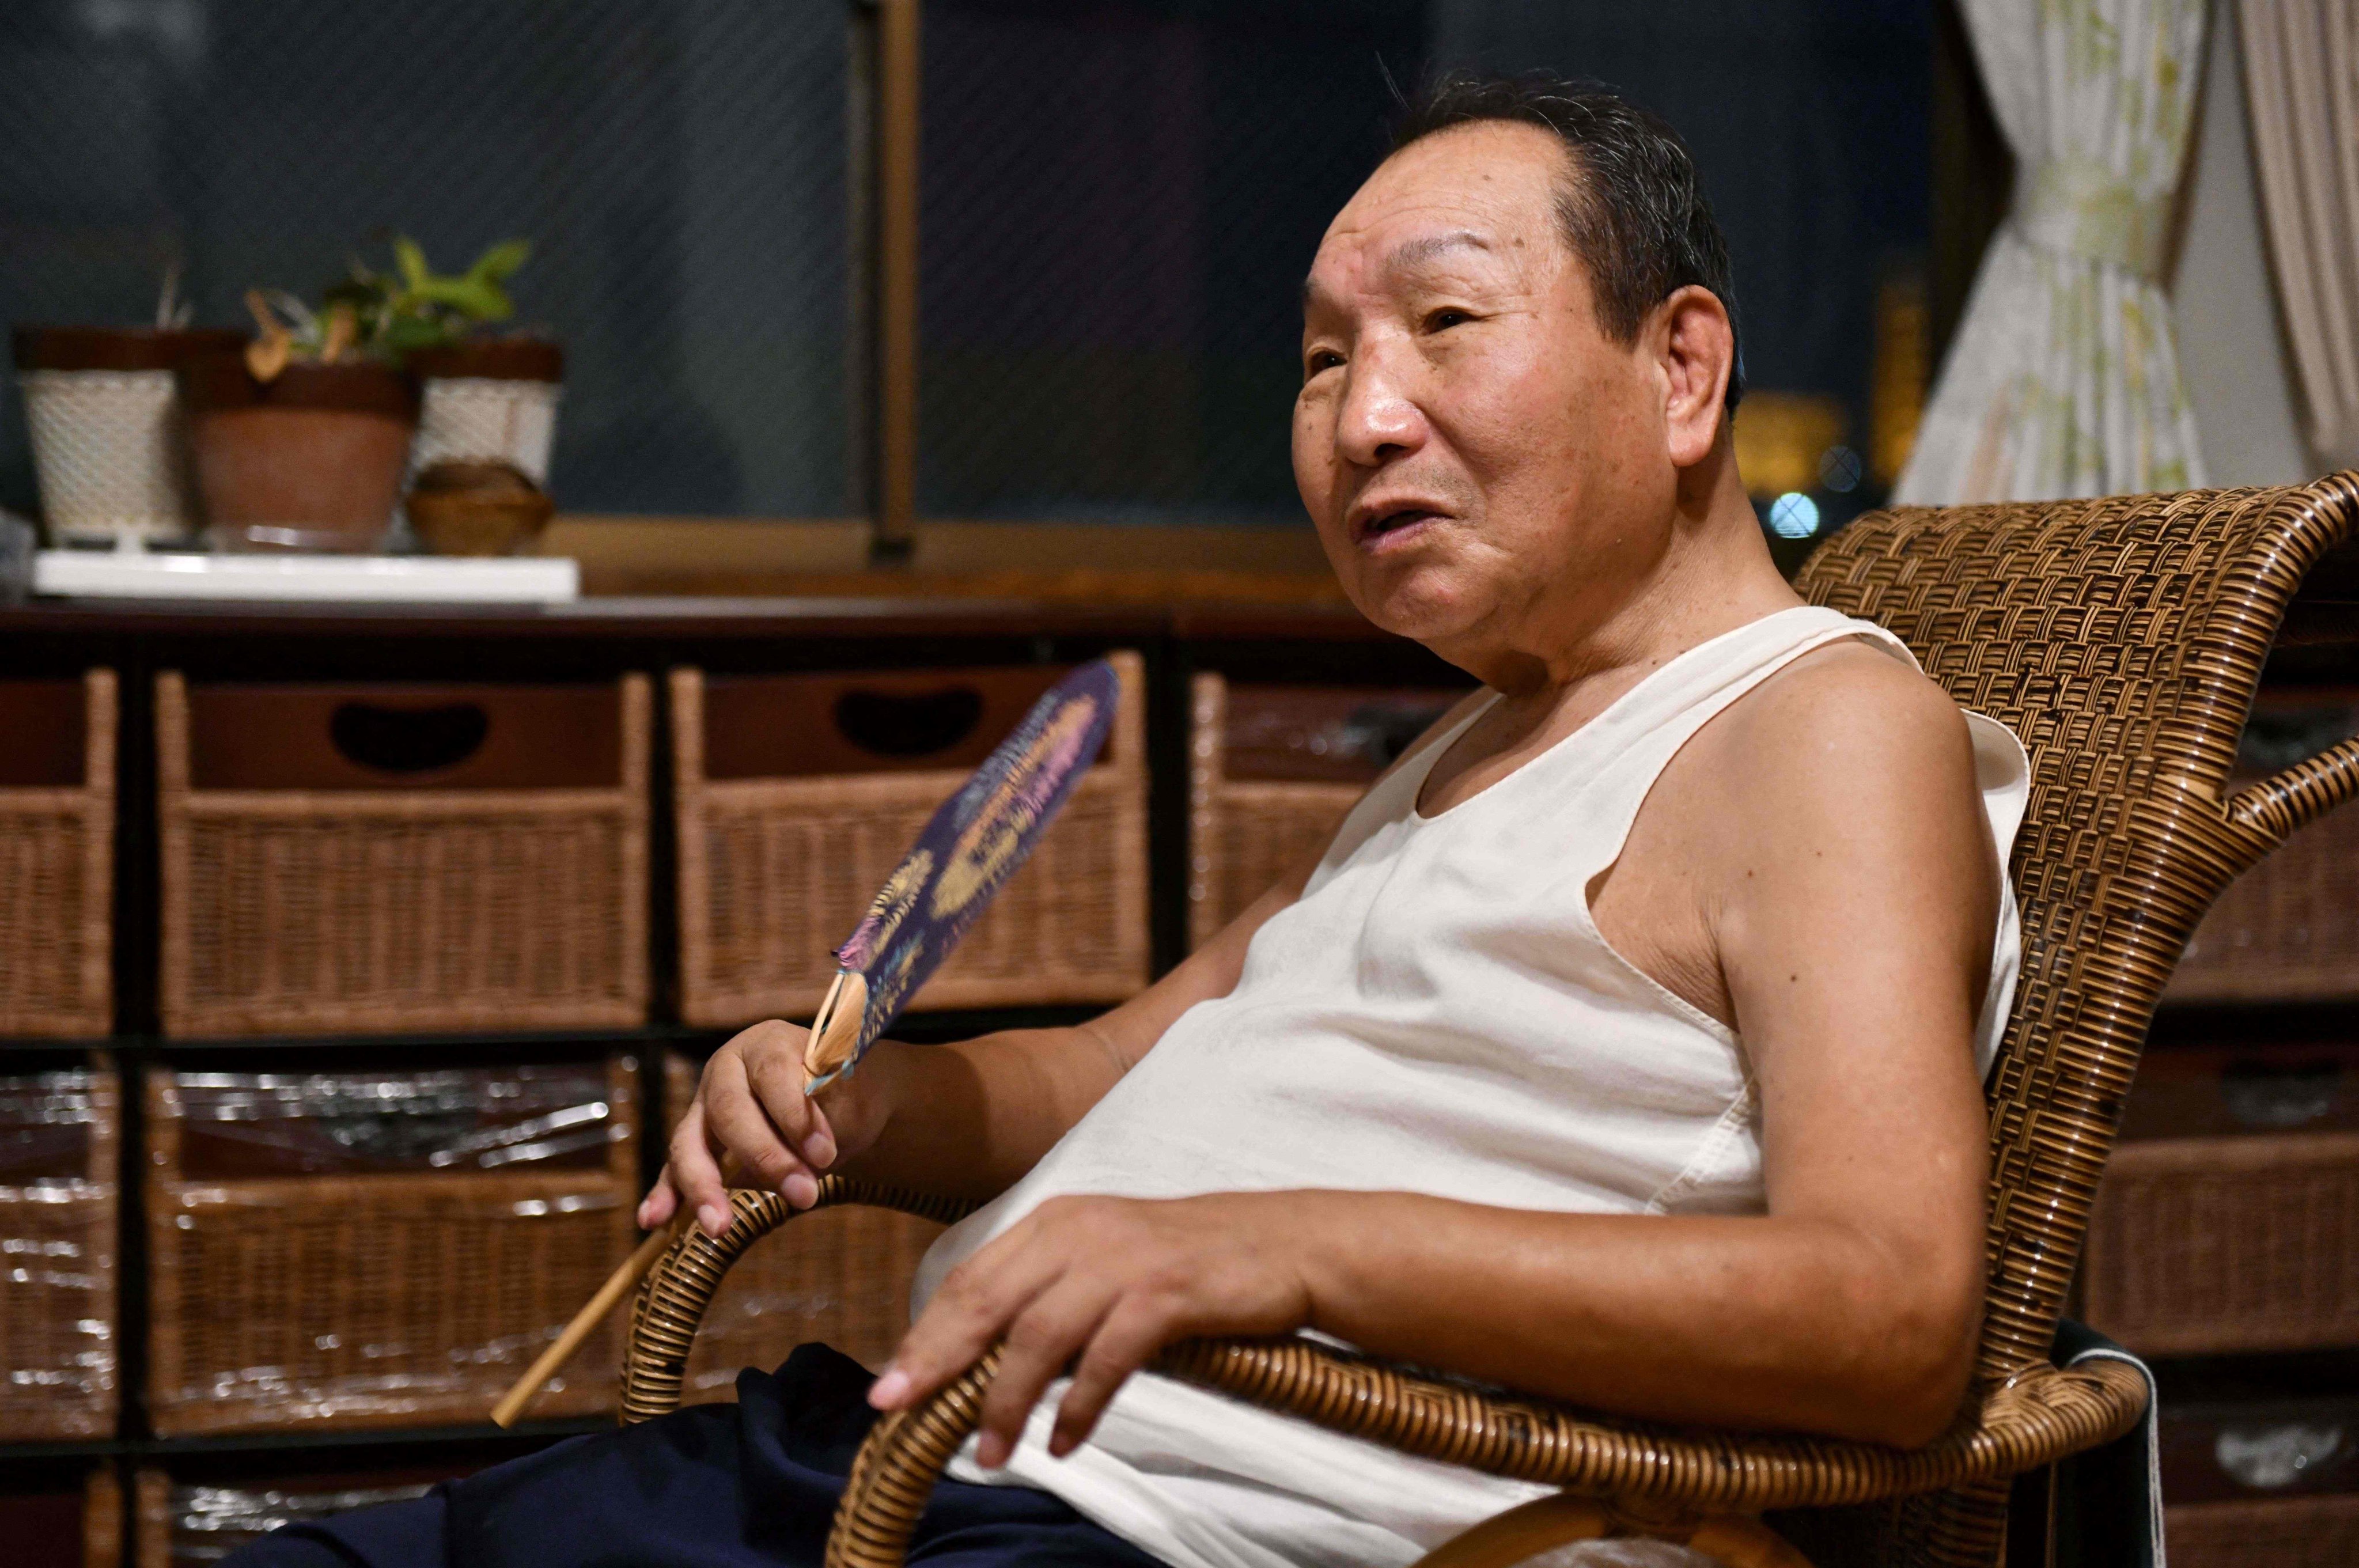 Iwao Hakamada, now 88, spent 46 years on death row – a stretch recognised by the Guinness World Records – after being convicted in 1968 of murdering a family. Photo: AFP